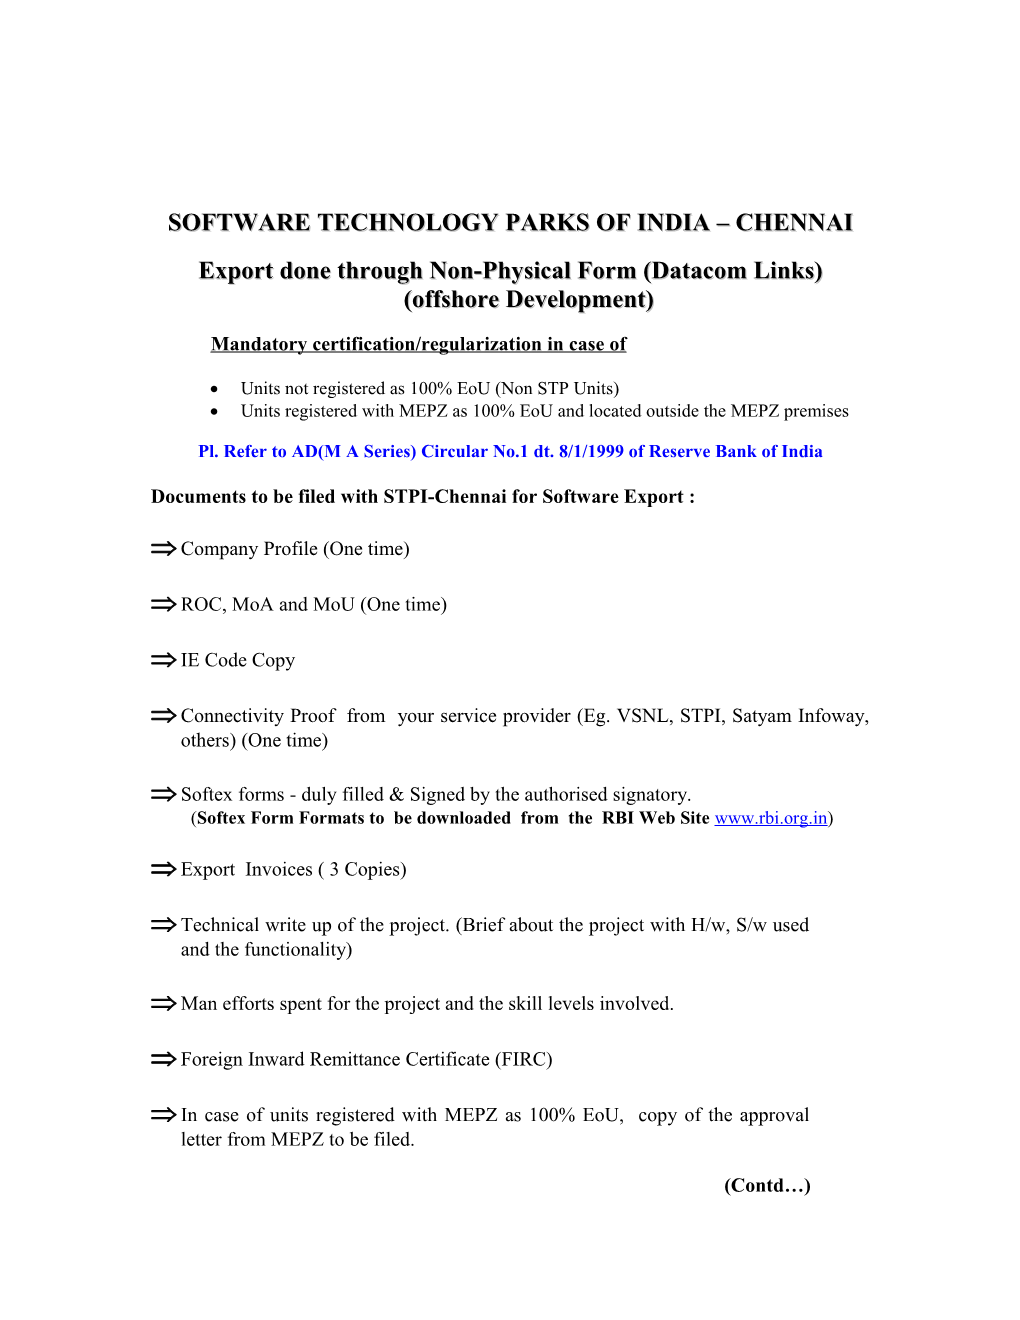 Software Technology Parks of India Chennai